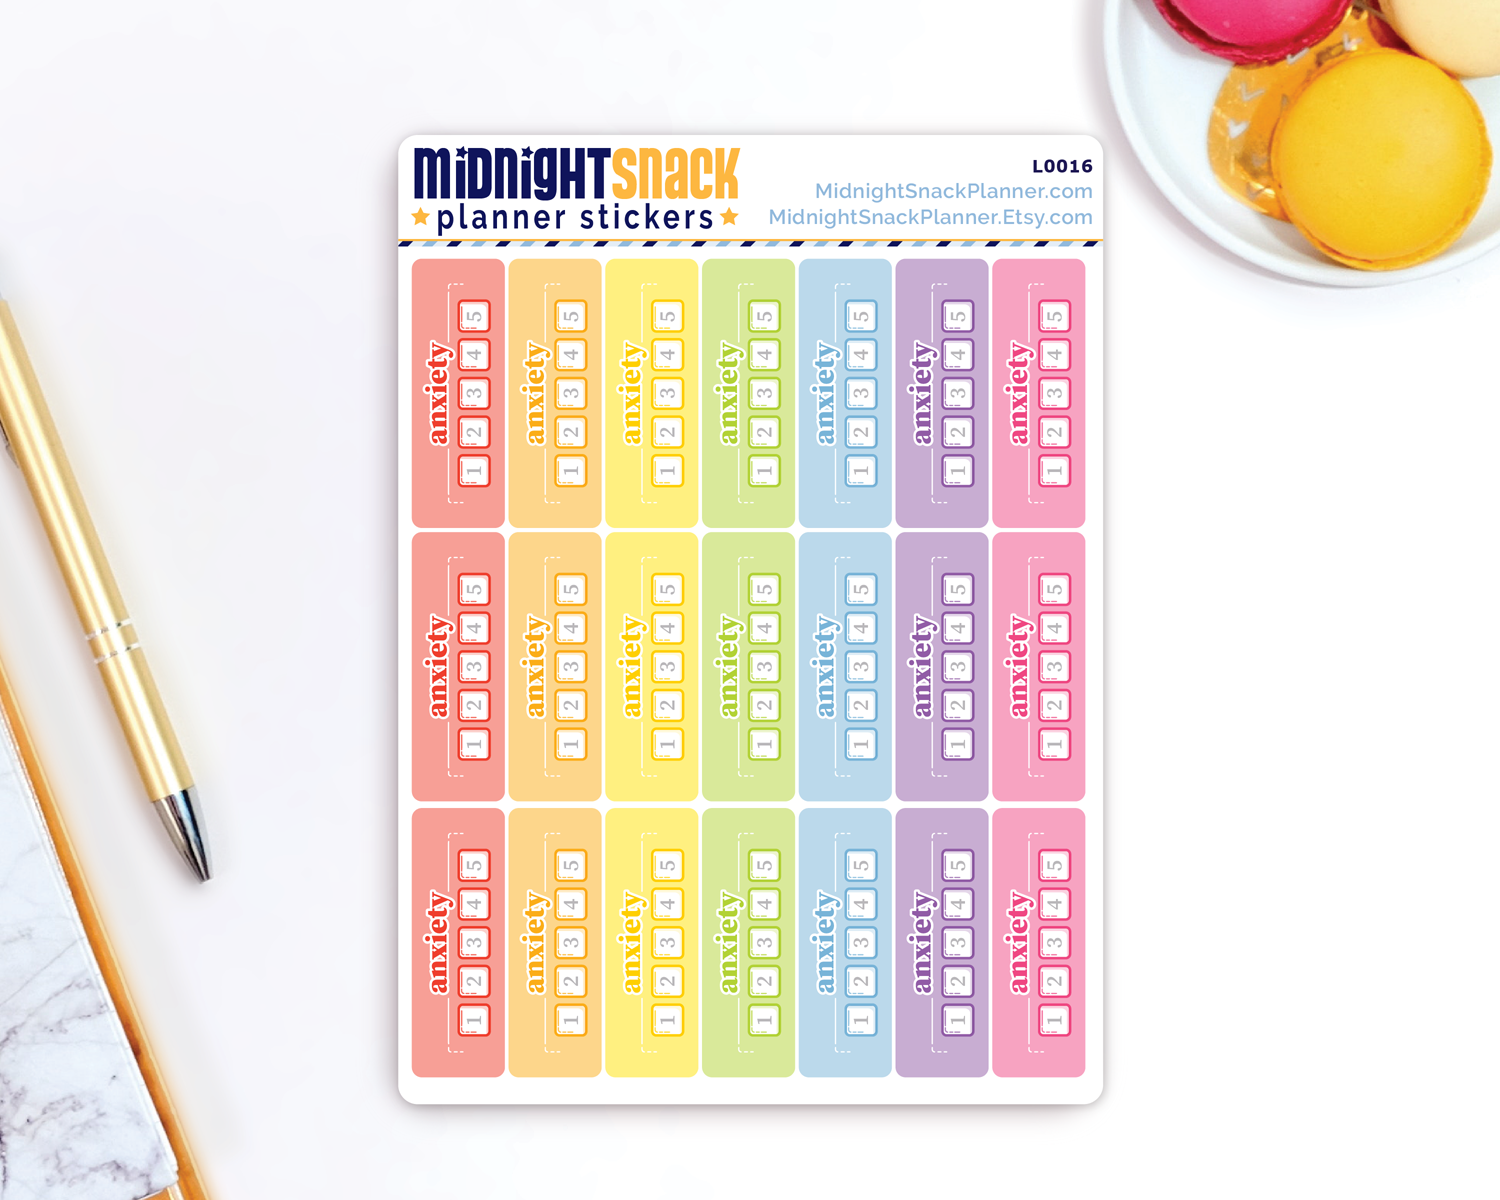 Anxiety Tracker Planner Stickers: Anxiety Scale 1-5